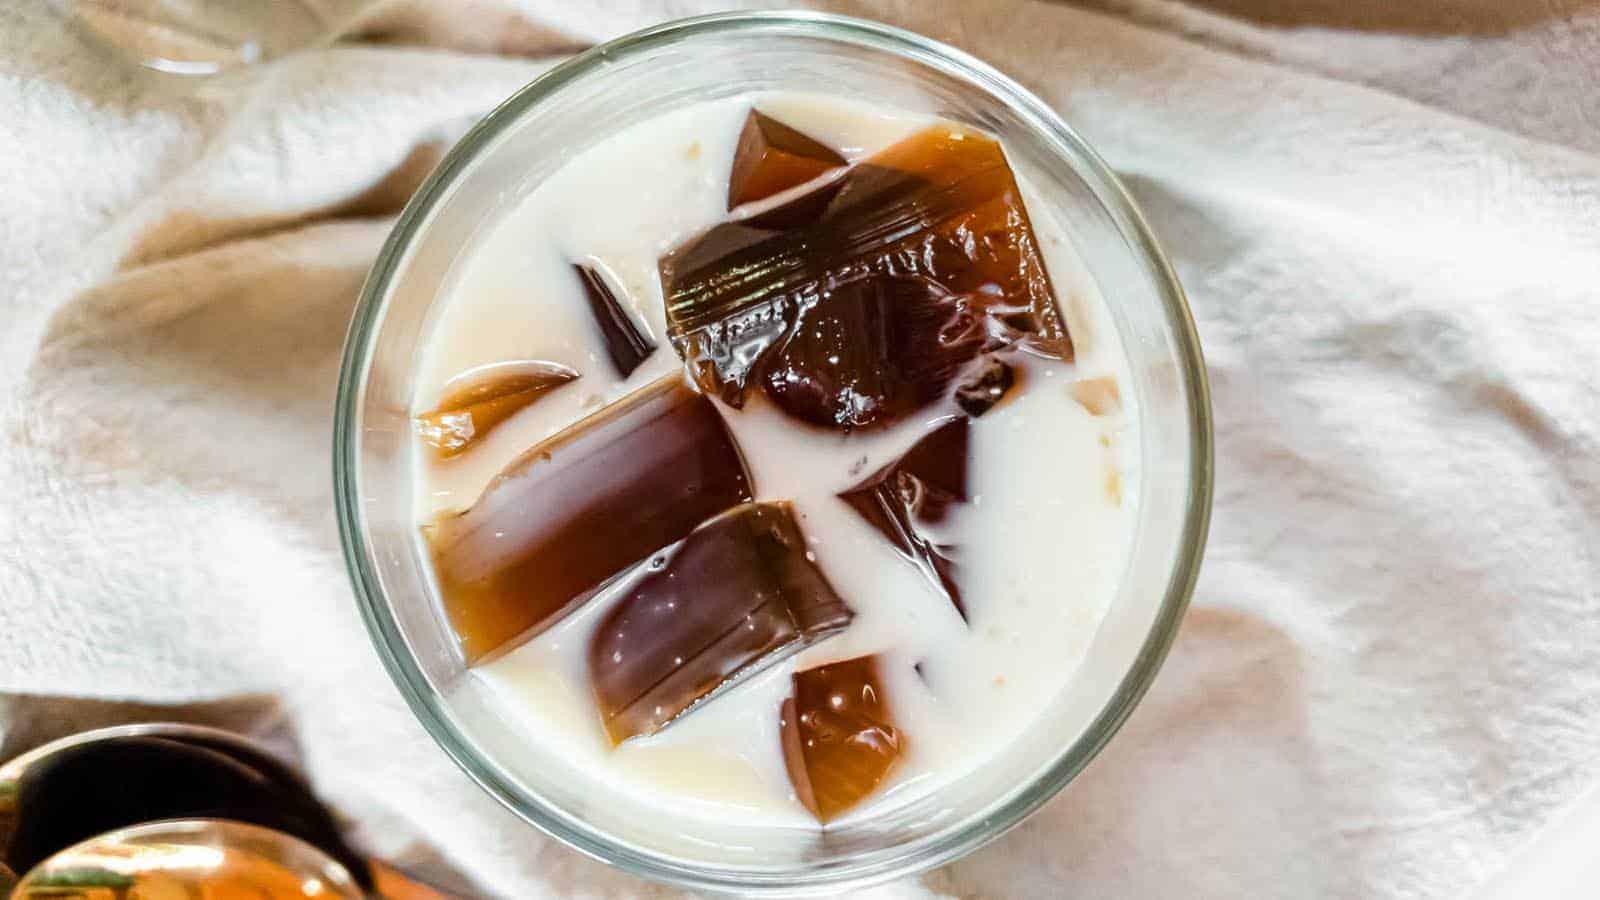 A glass of coffee jelly with heavy cream on a fabric background.